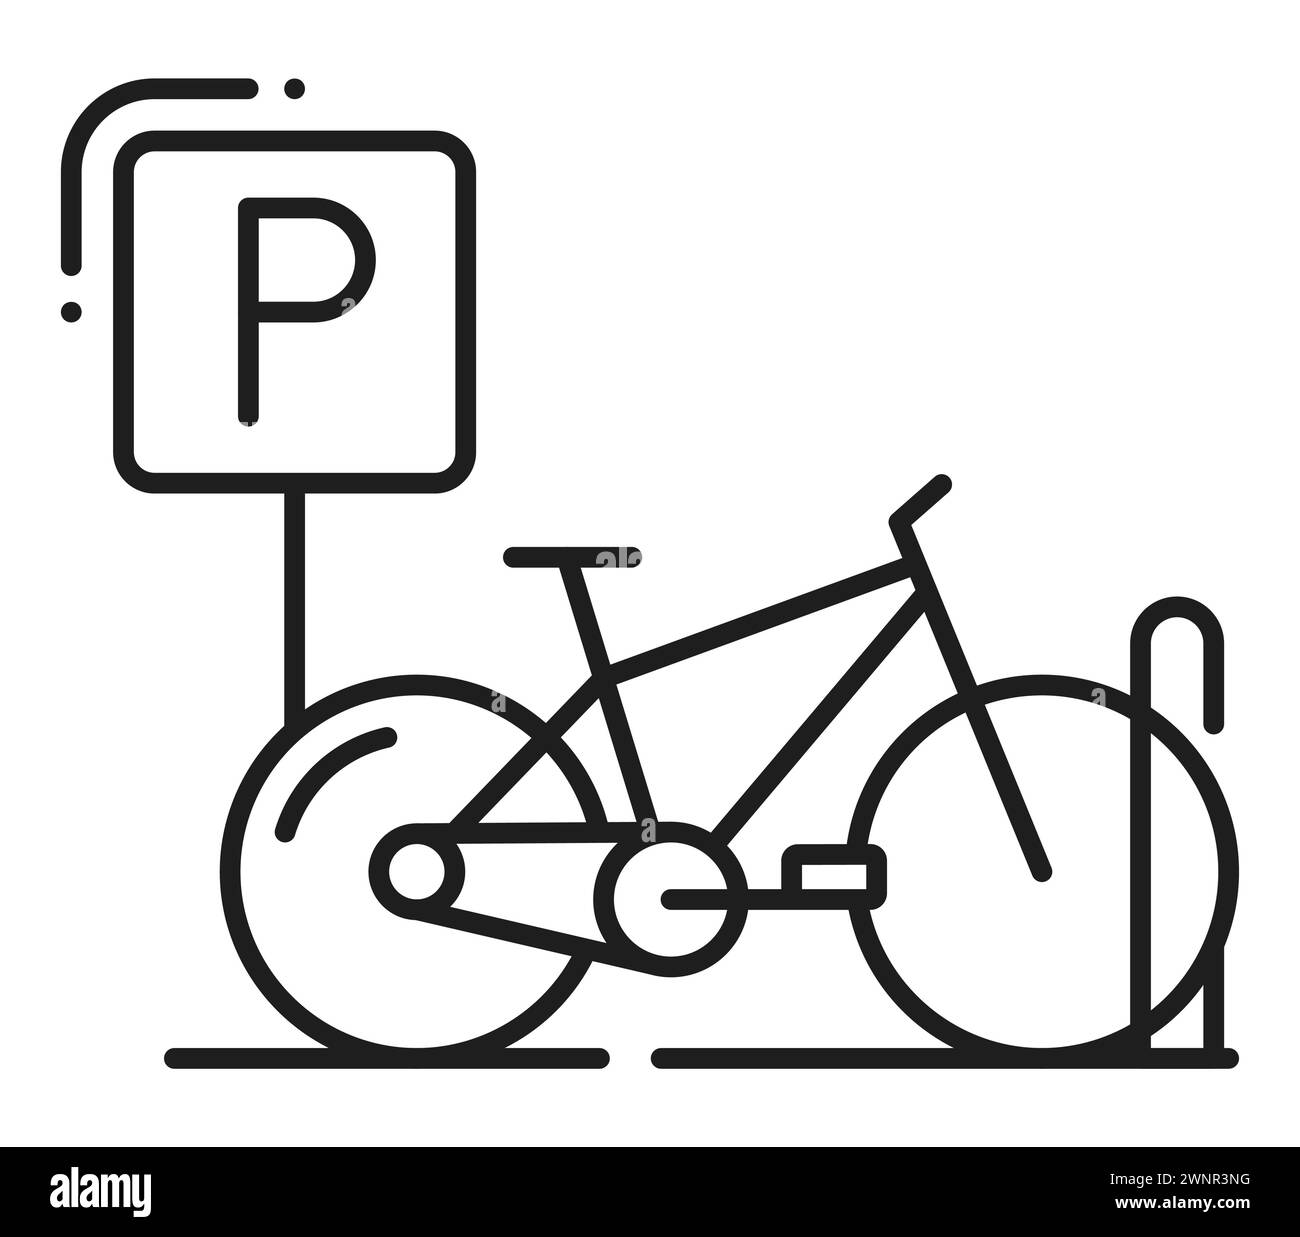 Parking for bicycle line icon, car garage service or bike station slot, vector linear sign. Parking place or zone for bicycle transport, outline pictogram for parking valet or public garage bikes area Stock Vector